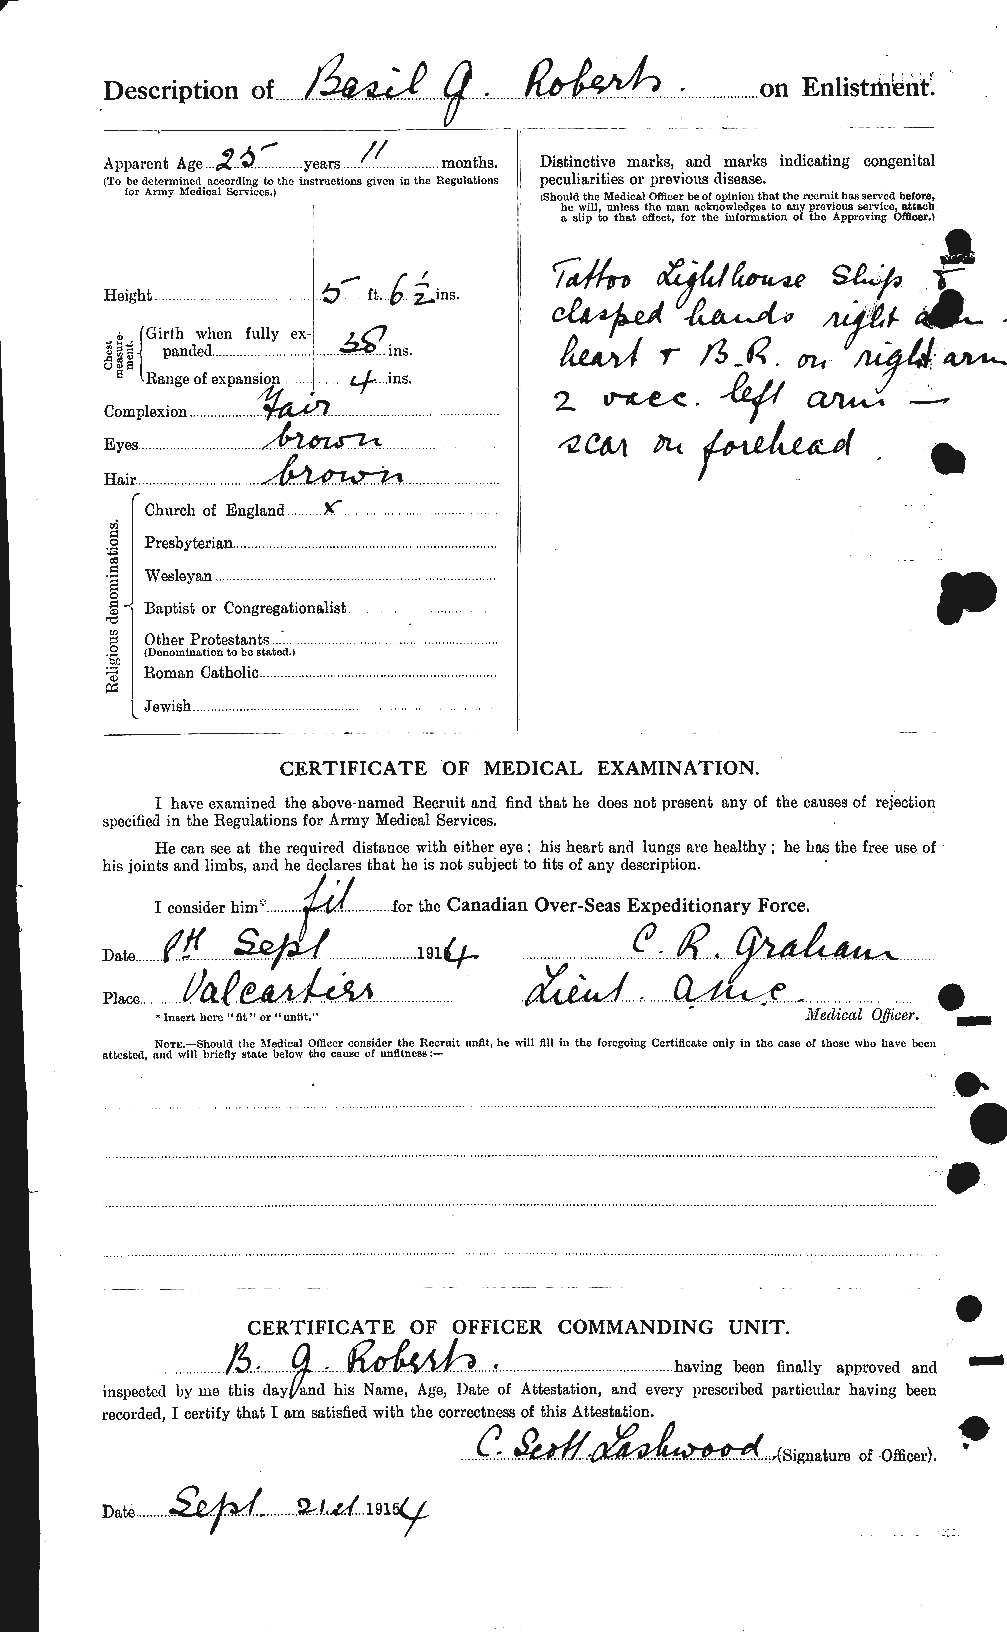 Personnel Records of the First World War - CEF 606268b